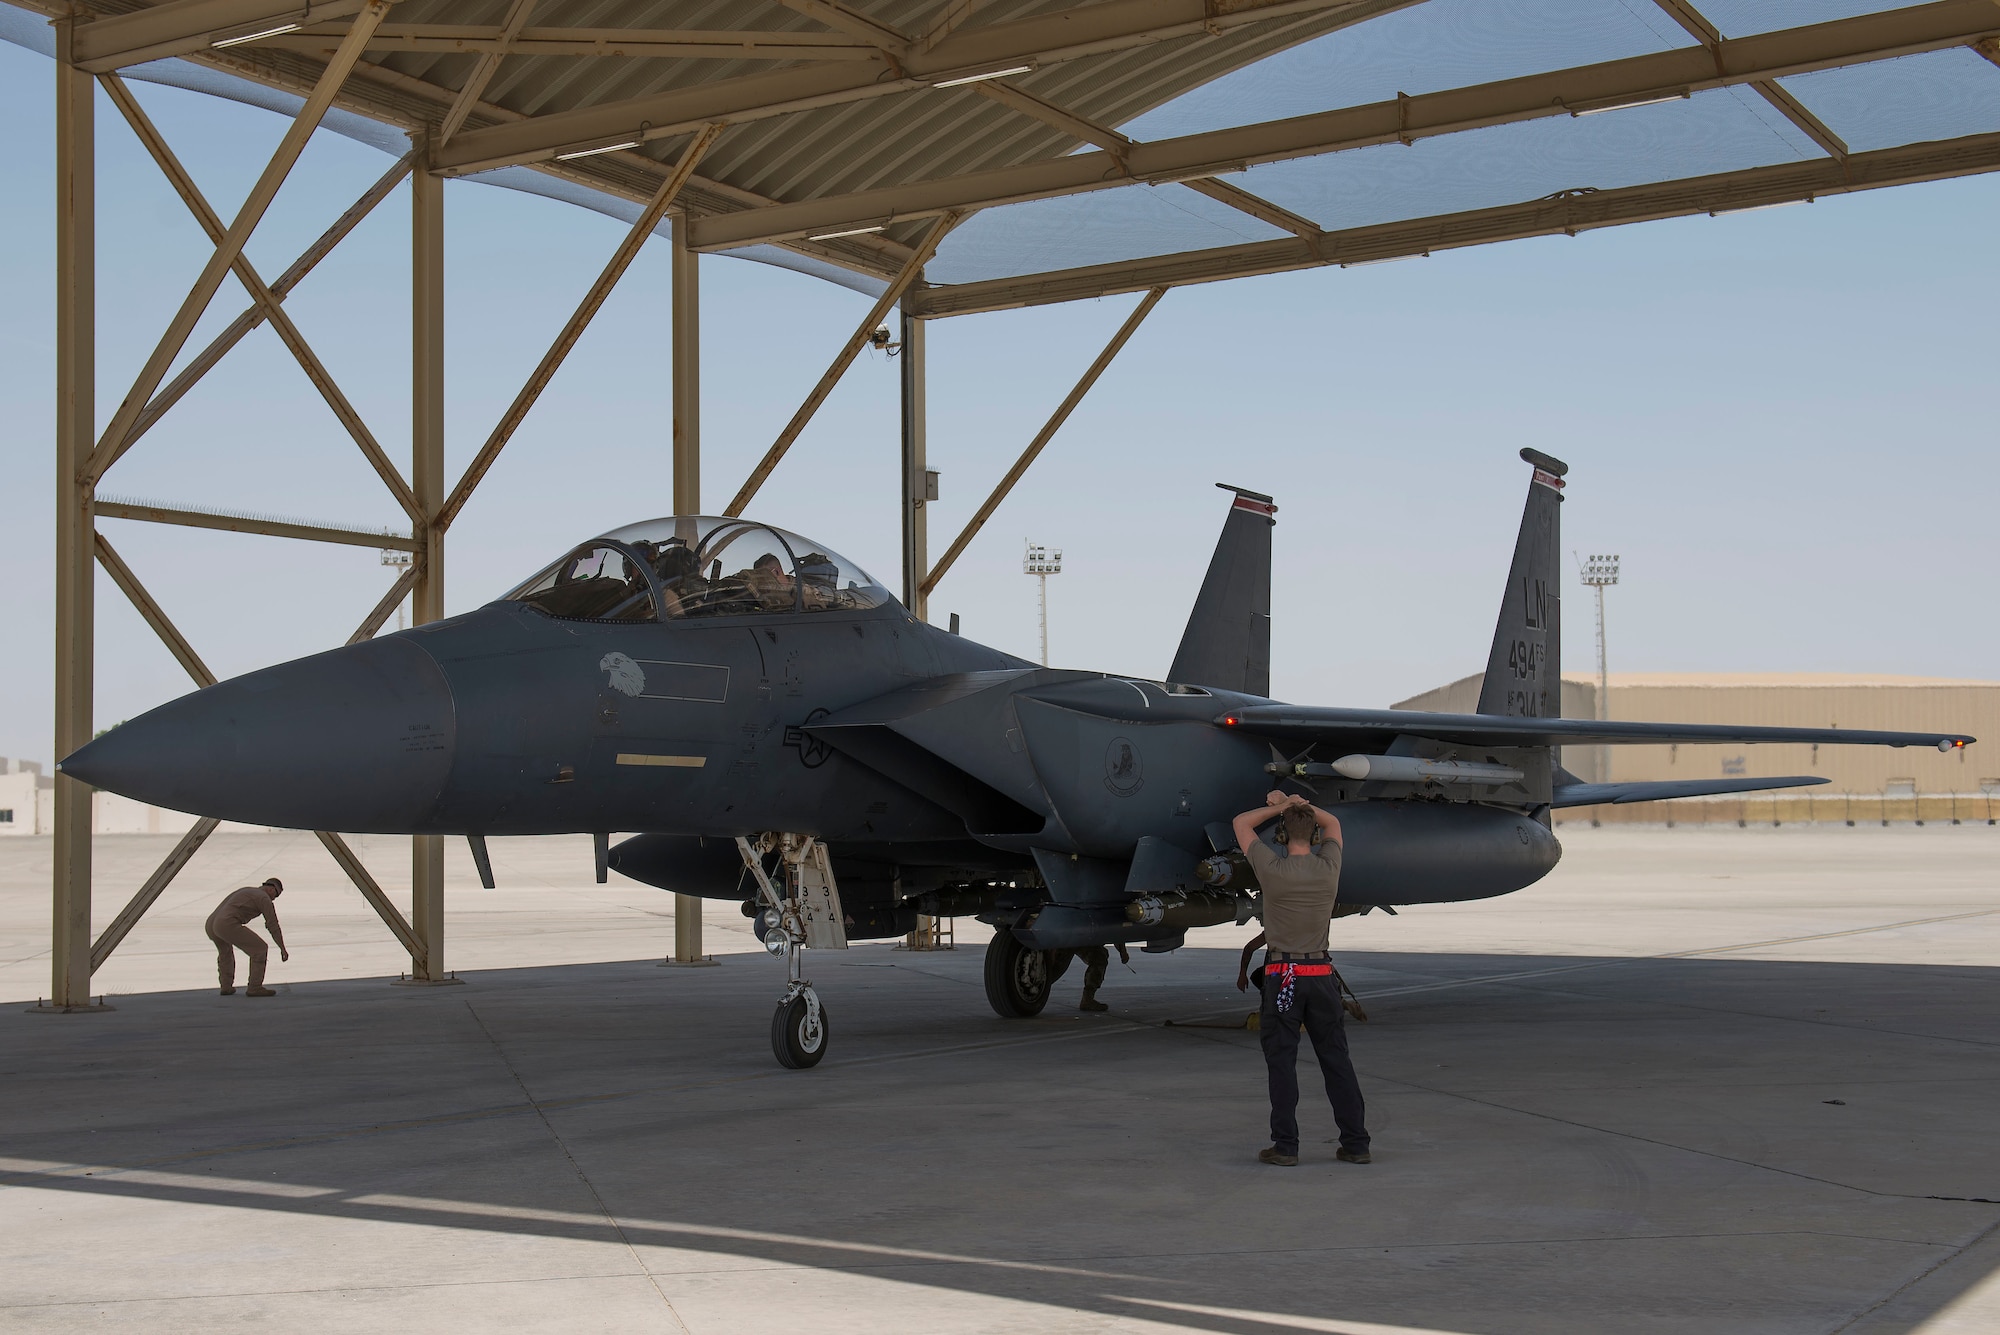 A crew chief assigned to the 380th Expeditionary Aircraft Maintenance Squadron marshals an F-15E Strike Eagle assigned to the 332nd Air Expeditionary Wing (AEW) at Al Dhafra Air Base, United Arab Emirates, April 25, 2021. The 494th Expeditionary Fighter Squadron, assigned to the 332nd AEW, re-located to Al Dhafra Air Base from an undisclosed location in order to support a U.S. Air Forces Central Agile Combat Employment operation. (U.S. Air Force photo by Staff Sgt. Zade Vadnais)